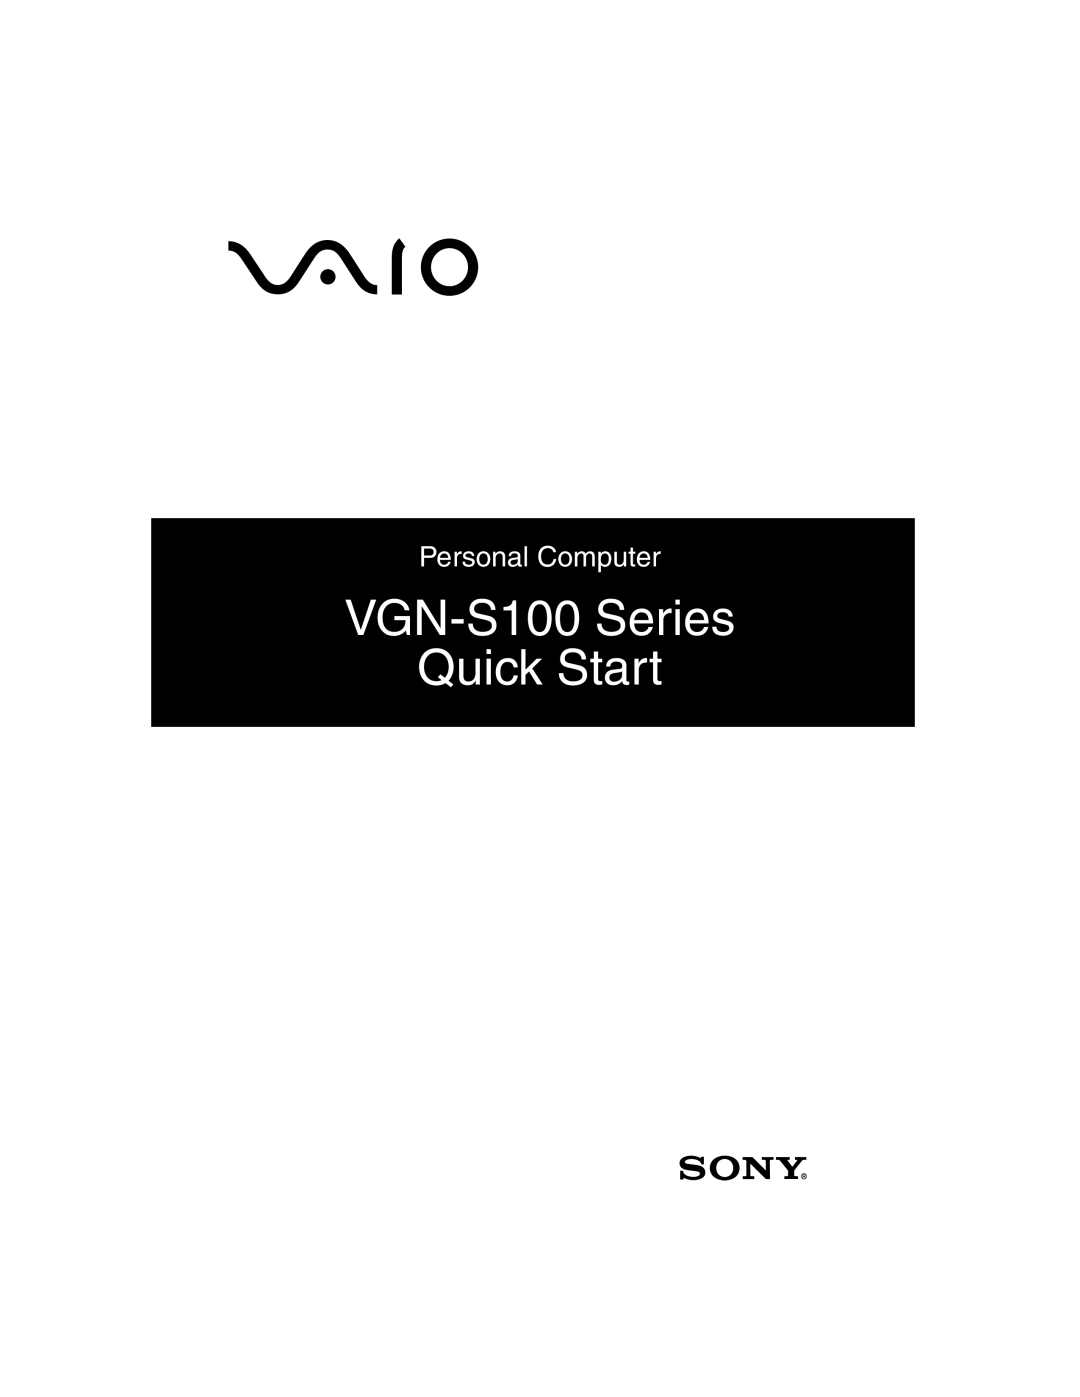 Sony quick start VGN-S100 Series Quick Start, Personal Computer 